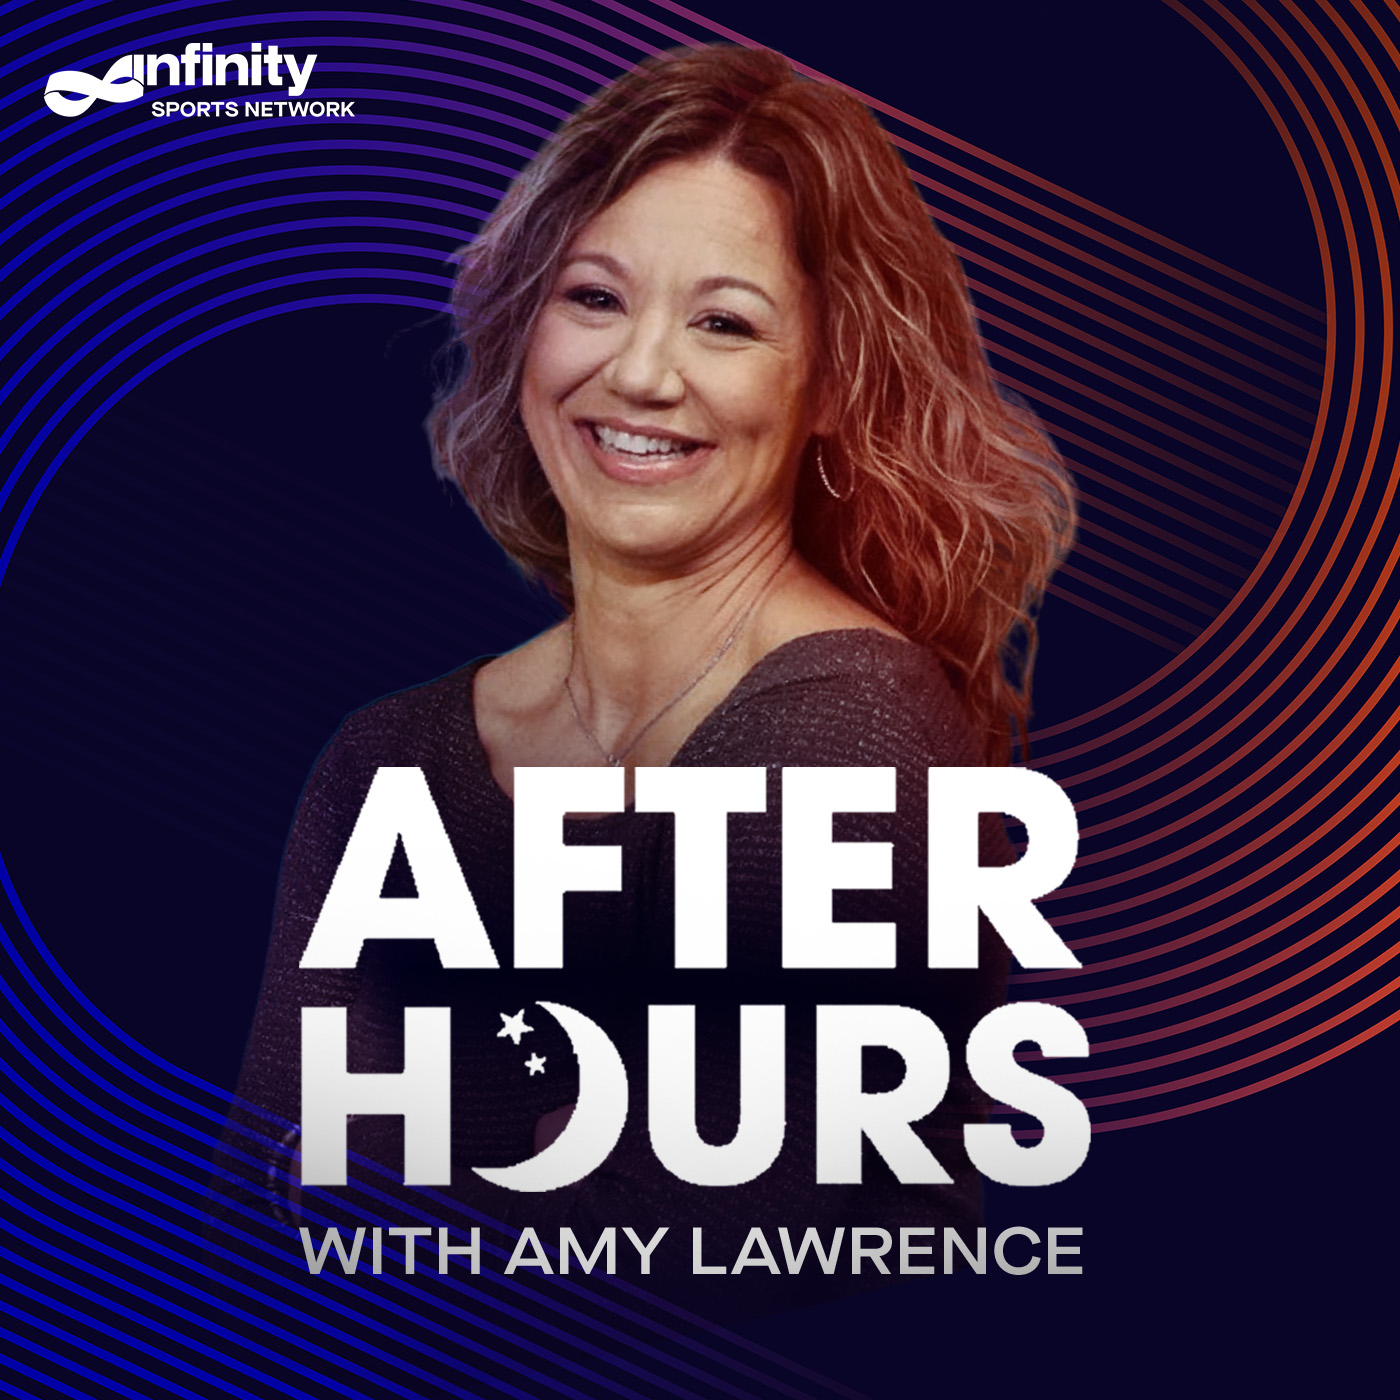 8-23-21 After Hours with Amy Lawrence PODCAST: Hour 2